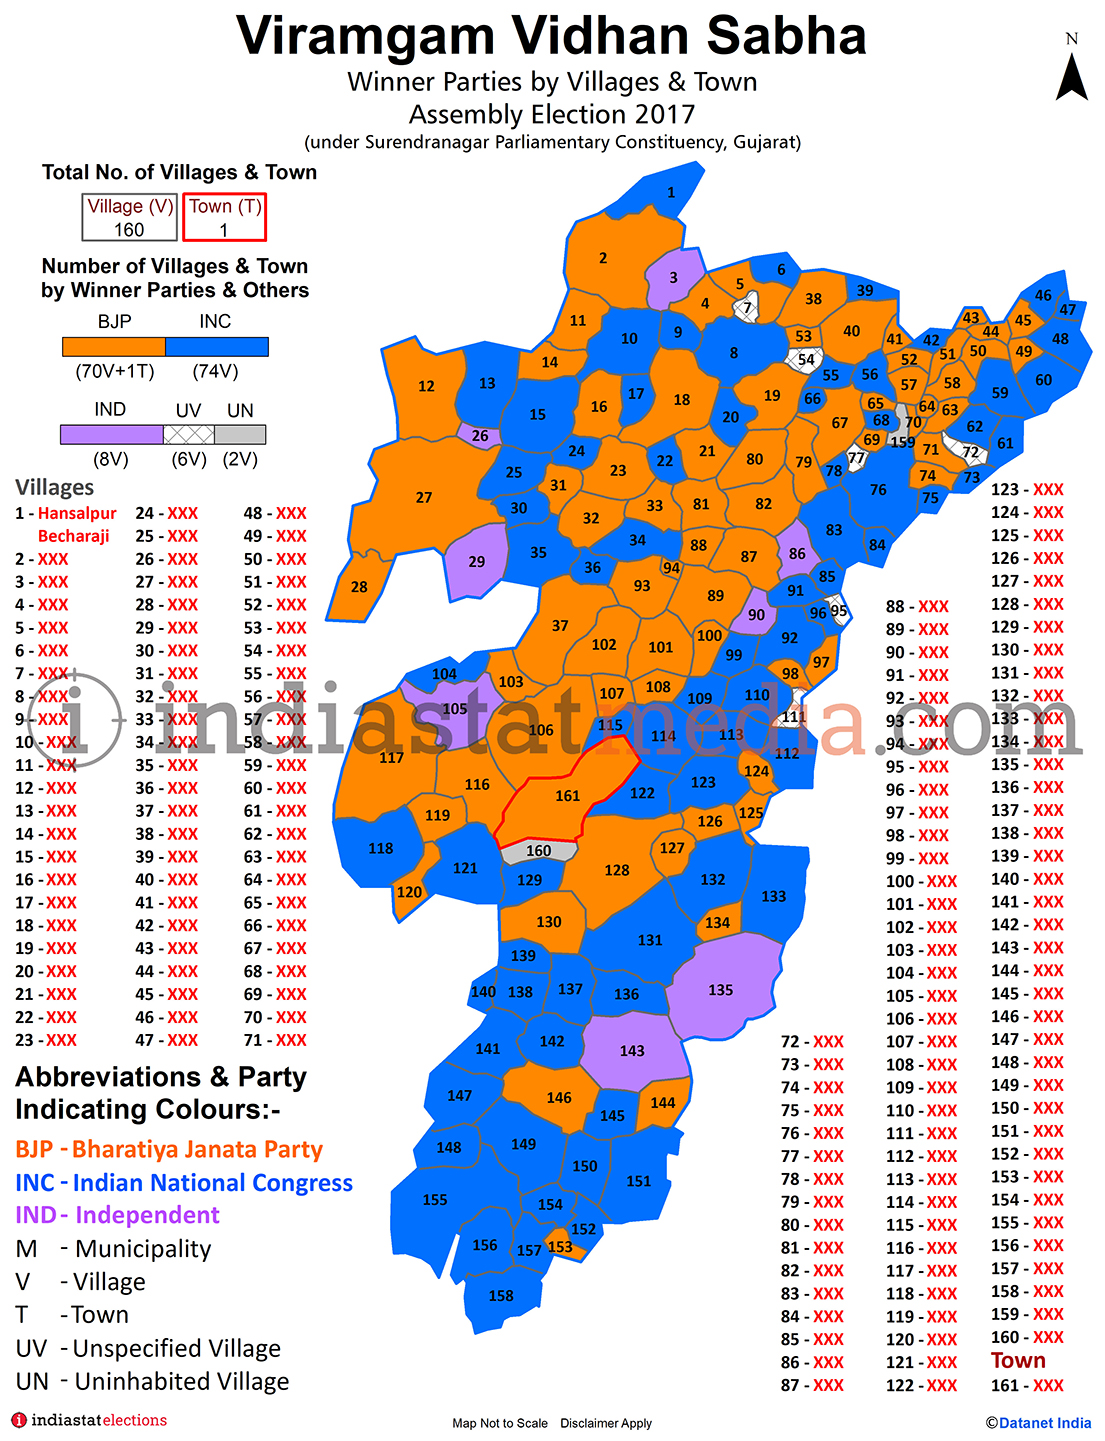 Winner Parties by Villages and Town in Viramgam Assembly Constituency under Surendranagar Parliamentary Constituency in Gujarat (Assembly Election - 2017)